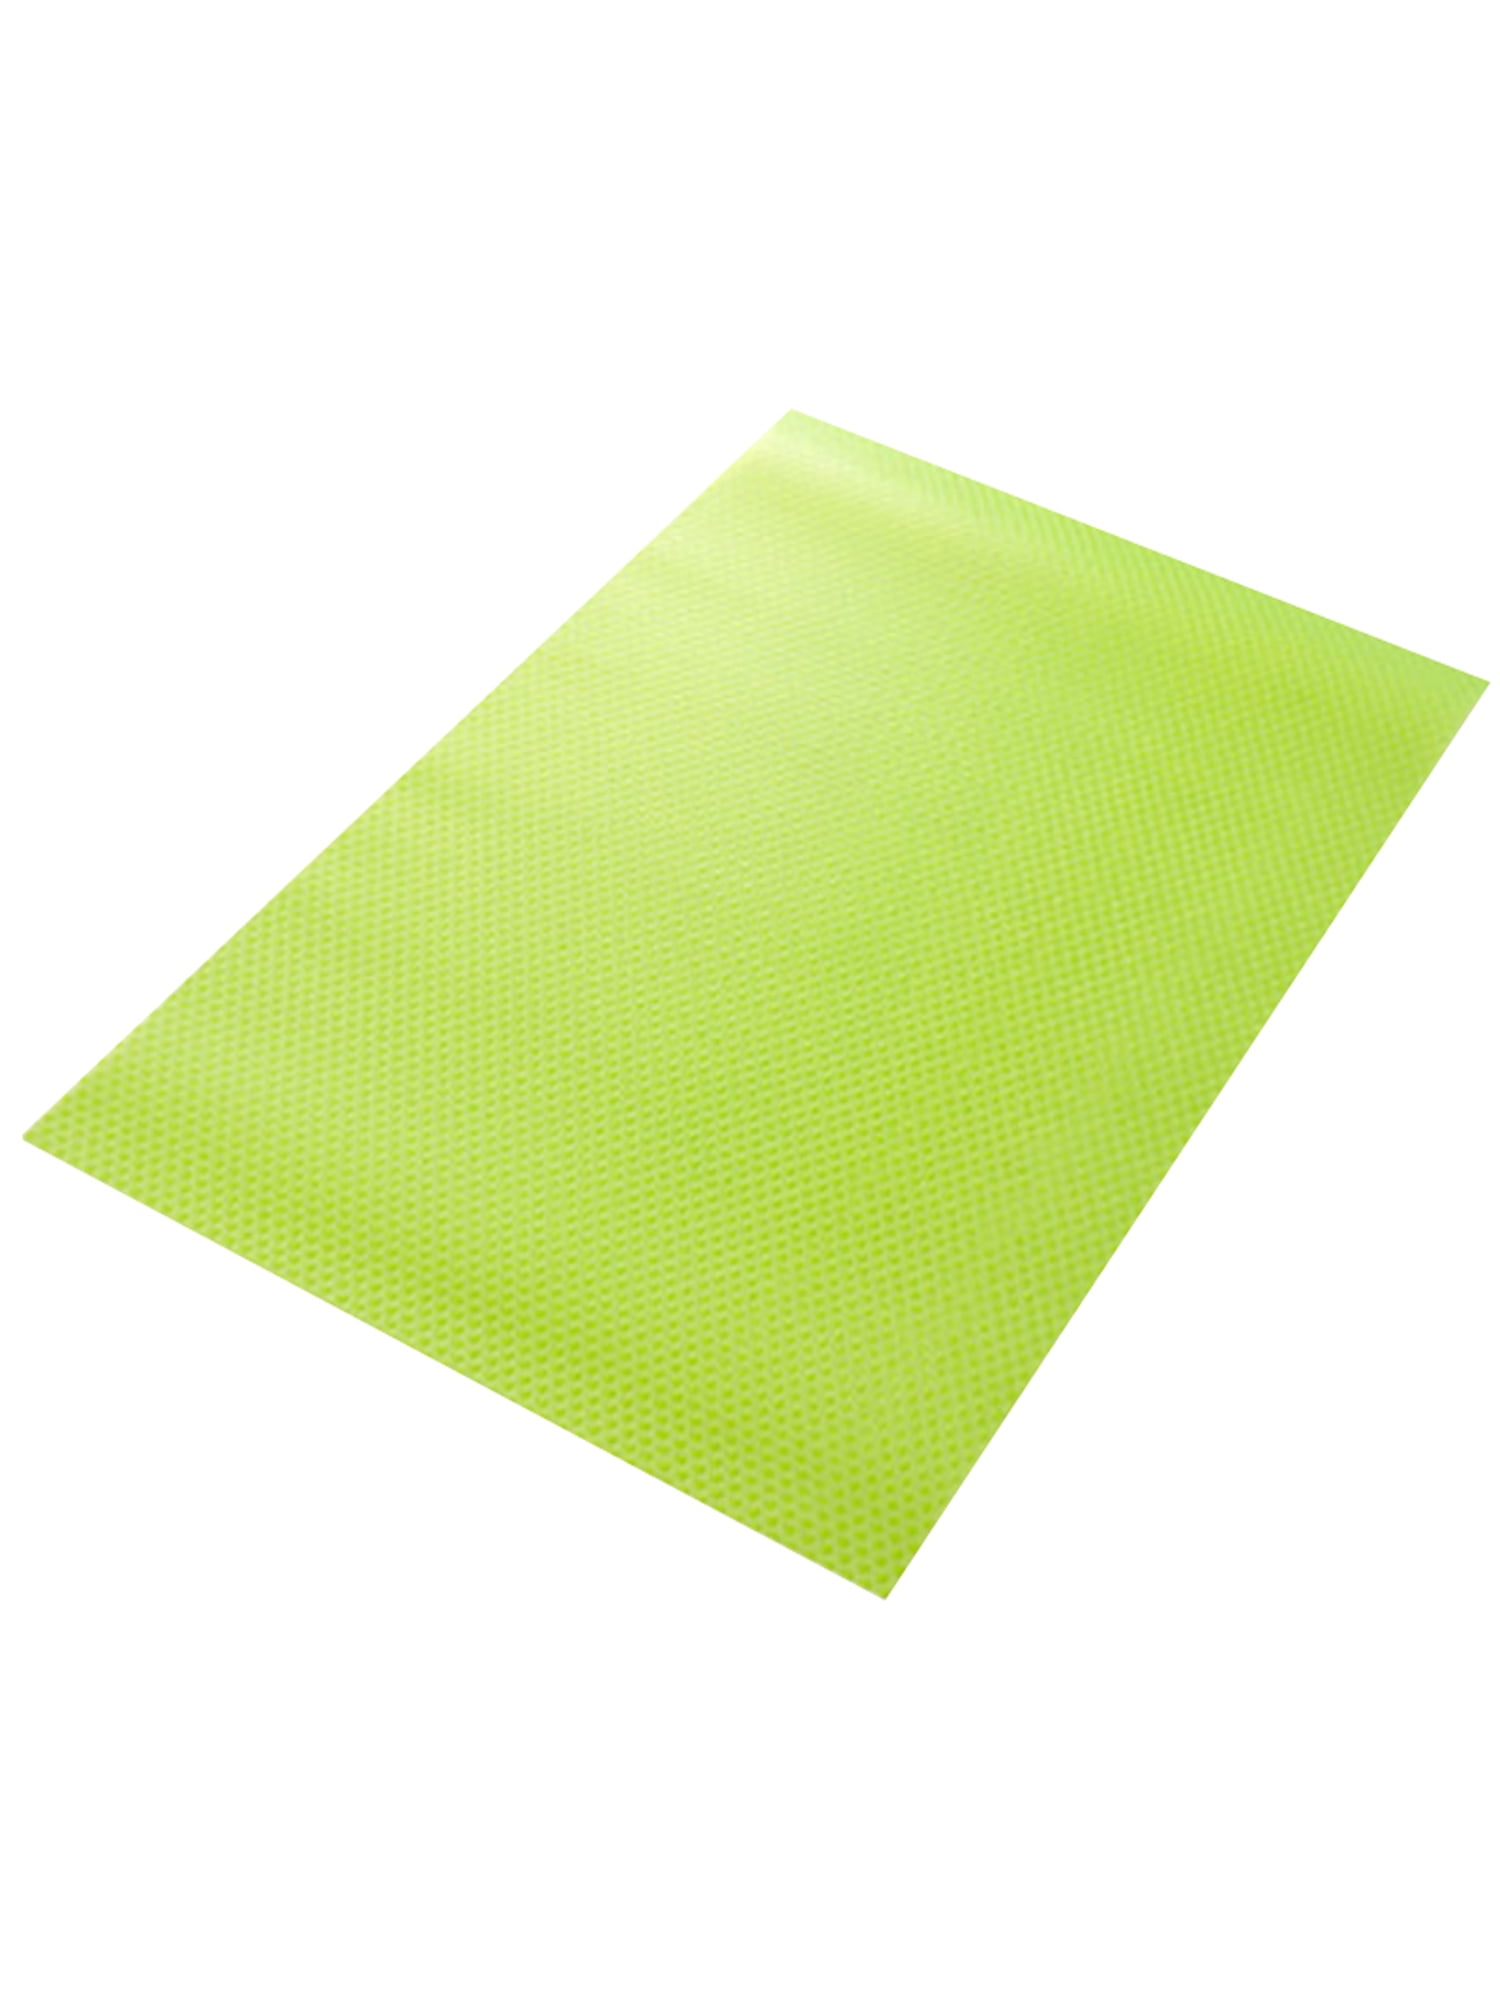 Details about   4 X Easy Clean Kitchen Cabinet Pad Anti Slip Fridge Liner Mat Same Day Shipping 